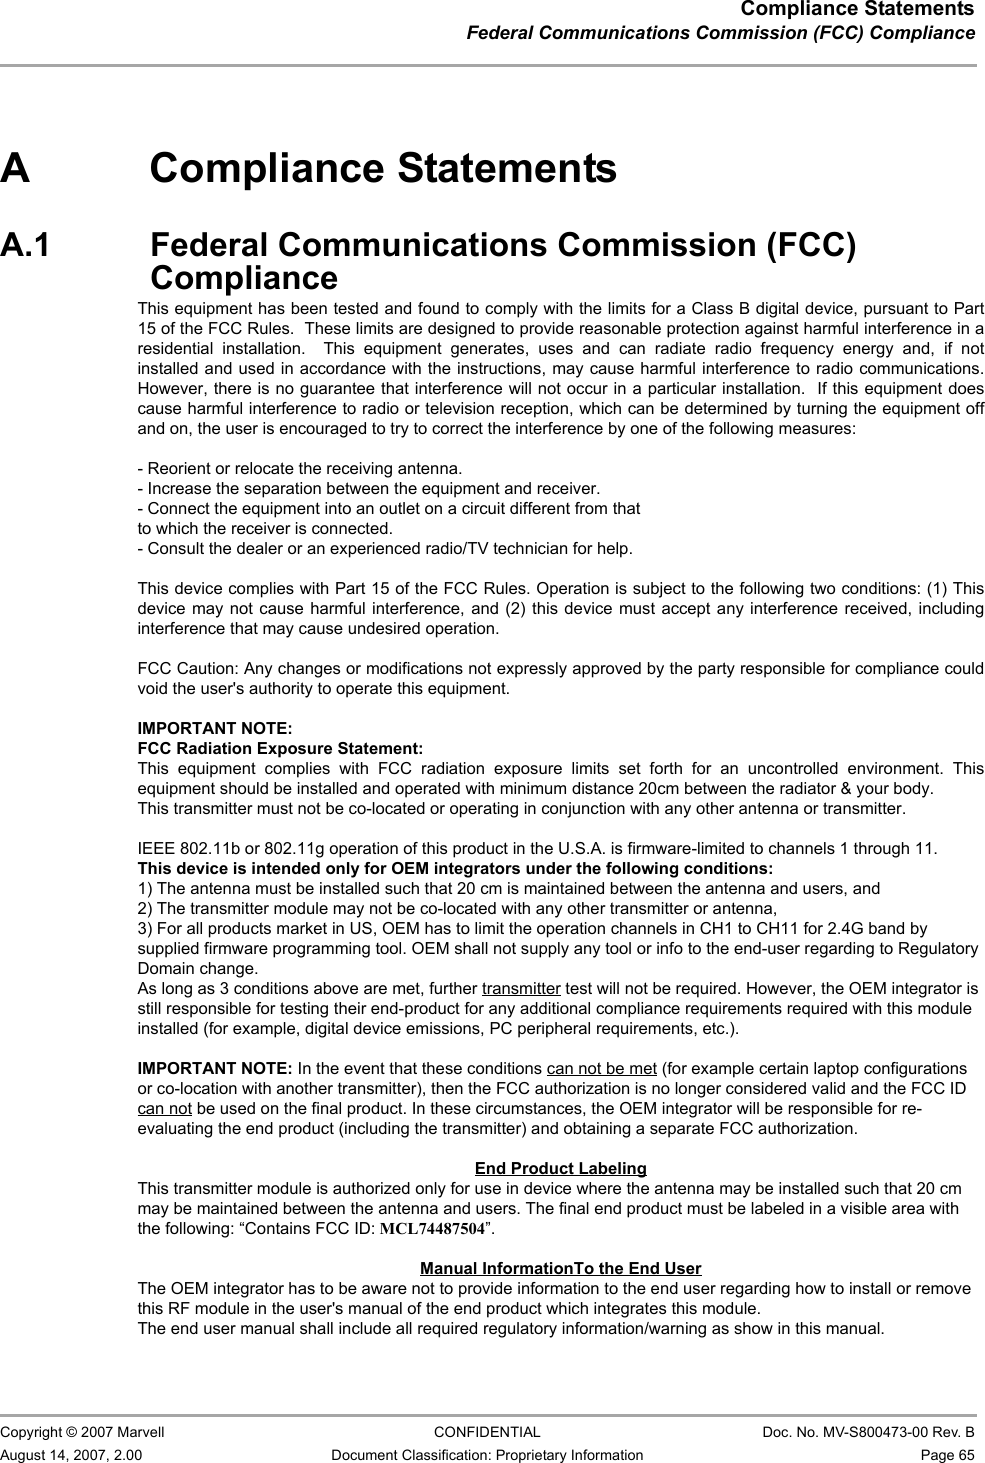 Compliance StatementsFederal Communications Commission (FCC) Compliance                         Copyright © 2007 Marvell CONFIDENTIAL Doc. No. MV-S800473-00 Rev. BAugust 14, 2007, 2.00 Document Classification: Proprietary Information Page 65 A Compliance StatementsA.1 Federal Communications Commission (FCC) ComplianceThis equipment has been tested and found to comply with the limits for a Class B digital device, pursuant to Part 15 of FCC Rules. These limits are designed to provide reasonable protection against harmful interference in a residential installation. This equipment generates, uses, and can radiate radio frequency energy. If not installed and used in accordance with the instructions, it may cause harmful interference to radio communications. However, there is no guarantee that interference will not occur in a particular installation.If this equipment does cause harmful interference to radio or television reception, which can be determined by tuning the equipment off and on, the user is encouraged to try and correct the interference by one or more of the following measures:Reorient or relocate the receiving antenna.Increase the distance between the equipment and the receiver.Connect the equipment to outlet on a circuit different from that to which the receiver is connected.Consult the dealer or an experienced radio/TV technician for help.ModificationsAny changes or modifications not expressly approved by the party responsible for compliance could void the user&apos;s authority to operate the equipment.A.2 Industry Canada NoticeThis device complies with Canadian RSS-210.“This Class B digital apparatus complies with Canadian ICES-003”Cet appareil numérique de la classe B est conforme à la norme NMB-003 du CanadaOperation is subject to the following two conditions: (1) this device may not cause interference, and (2) this device must accept any interference, including interference that may cause undesired operation of this device.”L&apos;utilisation de ce dispositif est autorisée seulement aux conditions suivantes : (1) il ne doit pas produire de brouillage et (2) l&apos;utilisateur du dispositif doit étre prêt à accepter tout brouillage radioélectrique reçu, même si ce brouillage est susceptible de compromettre le fonctionnement du dispositif.The term “IC” before the equipment certification number only signifies that the Industry Canada technical specifications were met.To reduce potential radio interference to other users, the antenna type and its gain should be so chosen that the equivalent isotropically radiated power (EIRP) is not more than that required for successful communication.To prevent radio interference to the licensed service, this device is intended to be operated indoors and away from windows to provide maximum shielding. Equipment (or its transmit antenna) that is installed outdoors is subject to licensing.                                                                                                                                                                                                                This equipment has been tested and found to comply with the limits for a Class B digital device, pursuant to Part15 of the FCC Rules.  These limits are designed to provide reasonable protection against harmful interference in aresidential  installation.    This  equipment  generates,  uses  and  can  radiate  radio  frequency  energy  and,  if  notinstalled and used in accordance with the instructions, may cause harmful interference to radio communications.However, there is no guarantee that interference will not occur in a particular installation.  If this equipment doescause harmful interference to radio or television reception, which can be determined by turning the equipment offand on, the user is encouraged to try to correct the interference by one of the following measures:- Reorient or relocate the receiving antenna.- Increase the separation between the equipment and receiver.- Connect the equipment into an outlet on a circuit different from thatto which the receiver is connected.- Consult the dealer or an experienced radio/TV technician for help.This device complies with Part 15 of the FCC Rules. Operation is subject to the following two conditions: (1) Thisdevice may not cause harmful interference, and (2) this device must accept any interference received, includinginterference that may cause undesired operation.FCC Caution: Any changes or modifications not expressly approved by the party responsible for compliance couldvoid the user&apos;s authority to operate this equipment.IMPORTANT NOTE:FCC Radiation Exposure Statement:This  equipment  complies  with  FCC  radiation  exposure  limits  set  forth  for  an  uncontrolled  environment.  Thisequipment should be installed and operated with minimum distance 20cm between the radiator &amp; your body.This transmitter must not be co-located or operating in conjunction with any other antenna or transmitter.IEEE 802.11b or 802.11g operation of this product in the U.S.A. is firmware-limited to channels 1 through 11.This device is intended only for OEM integrators under the following conditions:1) The antenna must be installed such that 20 cm is maintained between the antenna and users, and2) The transmitter module may not be co-located with any other transmitter or antenna,3) For all products market in US, OEM has to limit the operation channels in CH1 to CH11 for 2.4G band bysupplied firmware programming tool. OEM shall not supply any tool or info to the end-user regarding to RegulatoryDomain change.As long as 3 conditions above are met, further transmitter test will not be required. However, the OEM integrator isstill responsible for testing their end-product for any additional compliance requirements required with this moduleinstalled (for example, digital device emissions, PC peripheral requirements, etc.).IMPORTANT NOTE: In the event that these conditions can not be met (for example certain laptop configurationsor co-location with another transmitter), then the FCC authorization is no longer considered valid and the FCC IDcan not be used on the final product. In these circumstances, the OEM integrator will be responsible for re-evaluating the end product (including the transmitter) and obtaining a separate FCC authorization.End Product LabelingThis transmitter module is authorized only for use in device where the antenna may be installed such that 20 cmmay be maintained between the antenna and users. The final end product must be labeled in a visible area withthe following: “Contains FCC ID: MCL74487504”.Manual InformationTo the End UserThe OEM integrator has to be aware not to provide information to the end user regarding how to install or removethis RF module in the user&apos;s manual of the end product which integrates this module.The end user manual shall include all required regulatory information/warning as show in this manual.